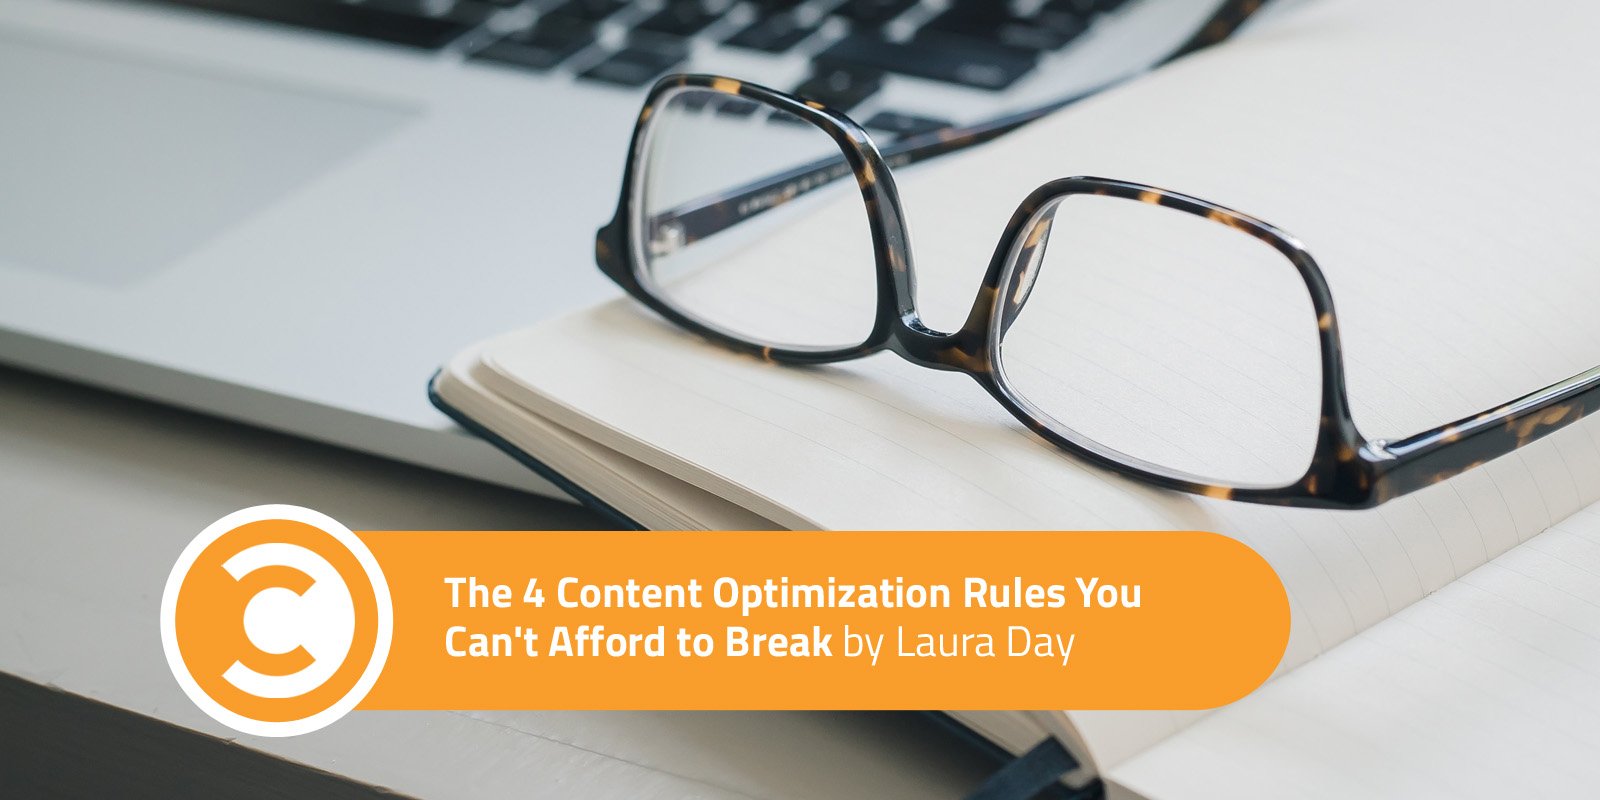 The 4 Content Optimization Rules You Can't Afford to Break